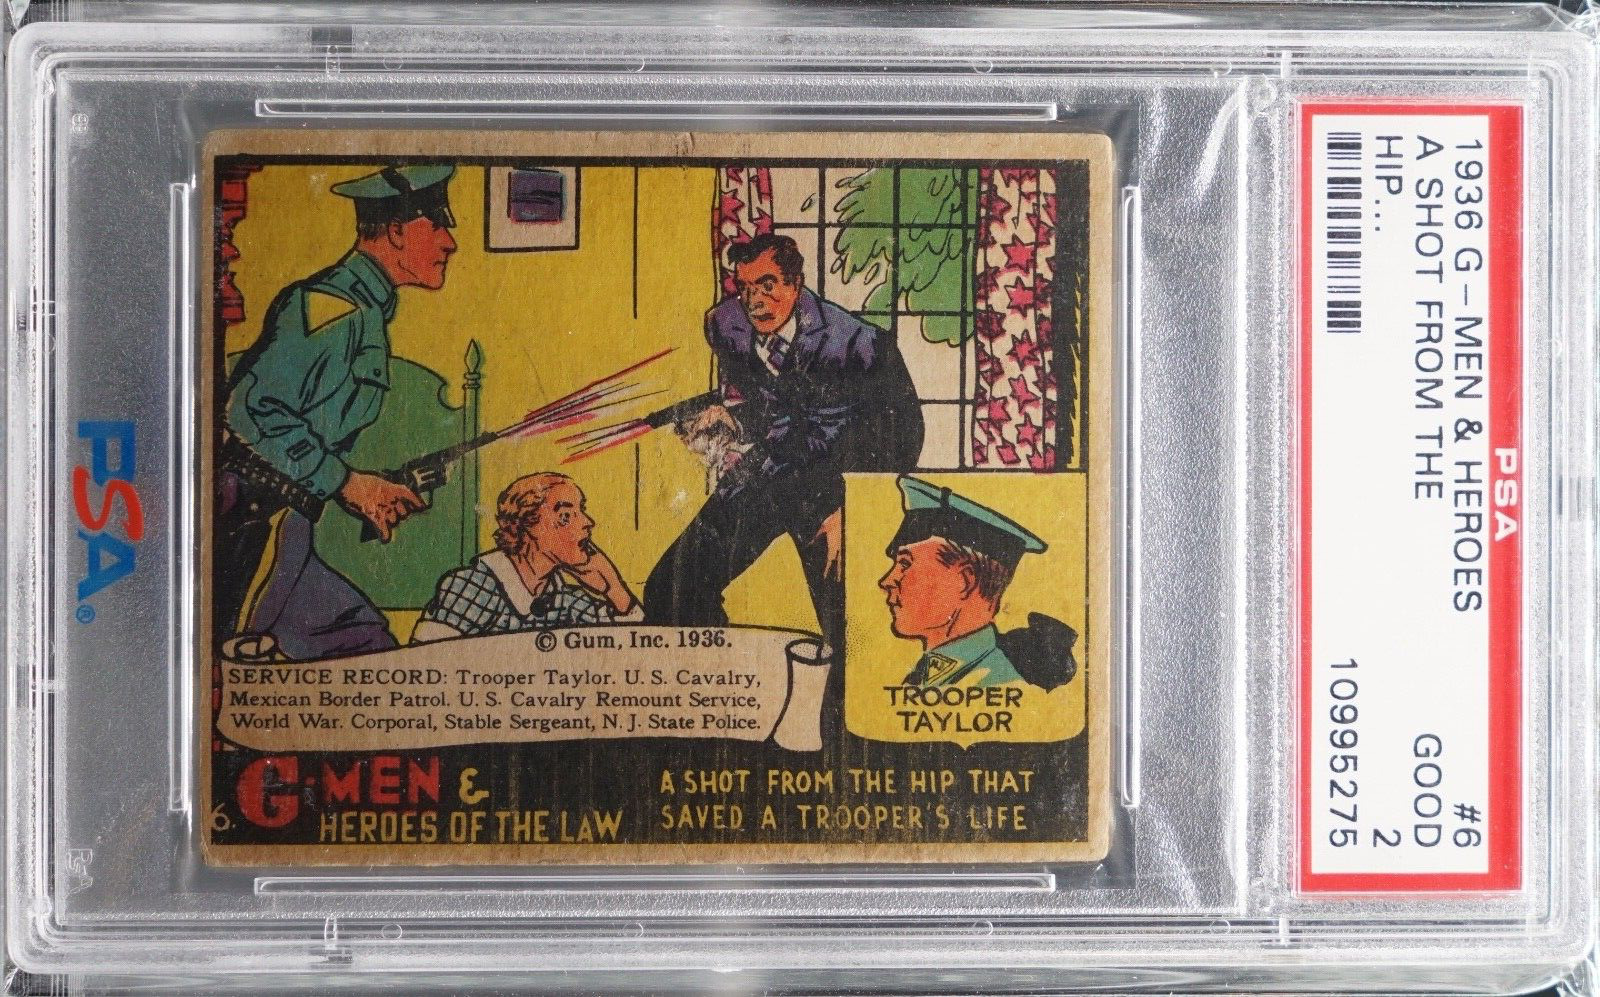 1936 Gum G-Men & Heroes of The Law - #6 G-Men Card A Shot From The Hip... PSA 2